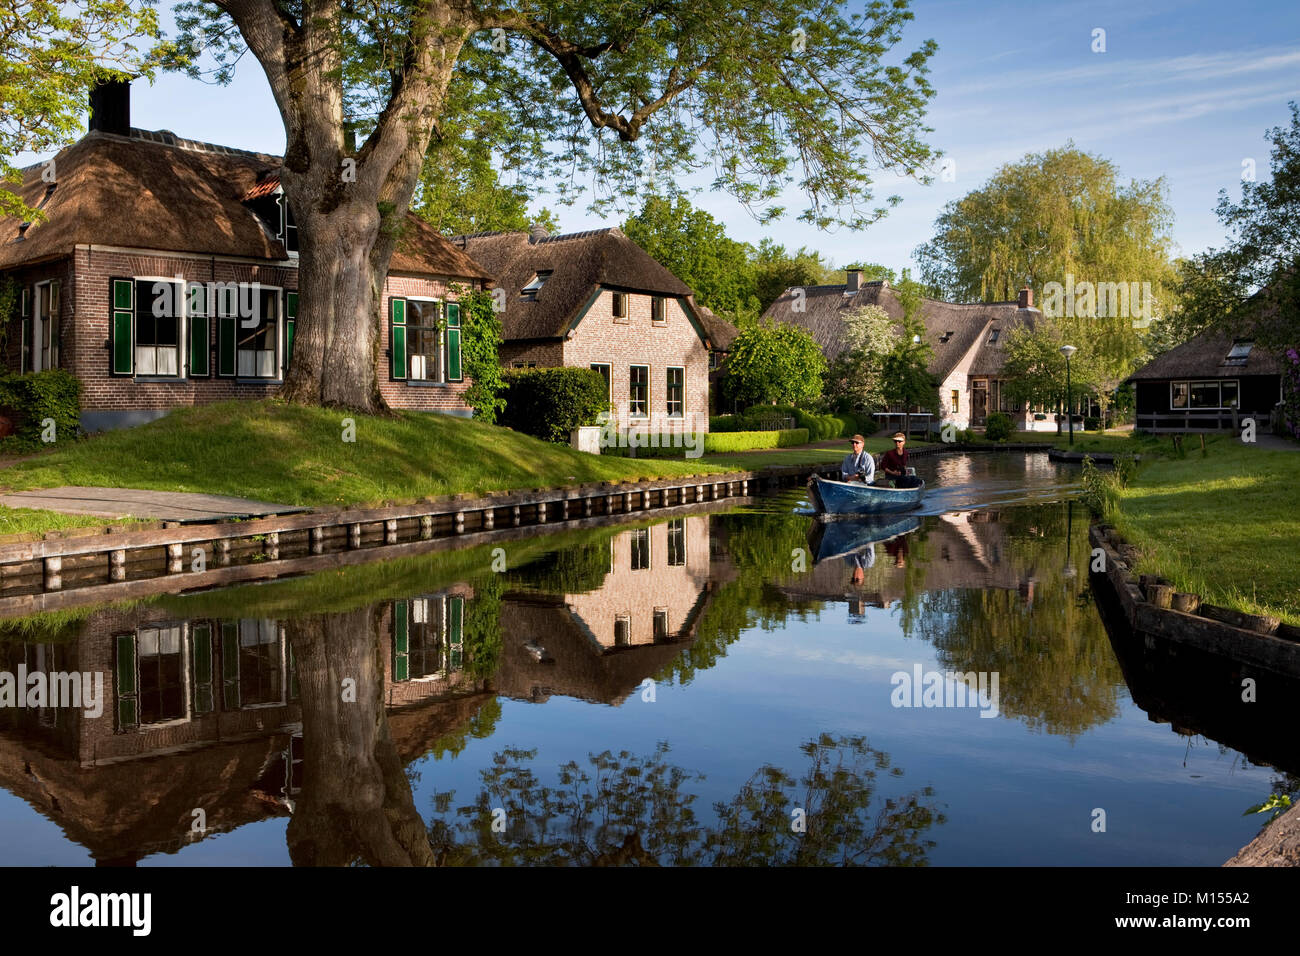 The Netherlands, Dwarsgracht, near Giethoorn, Village with almost only waterways. Tourist couple enjoying boat ride. Stock Photo